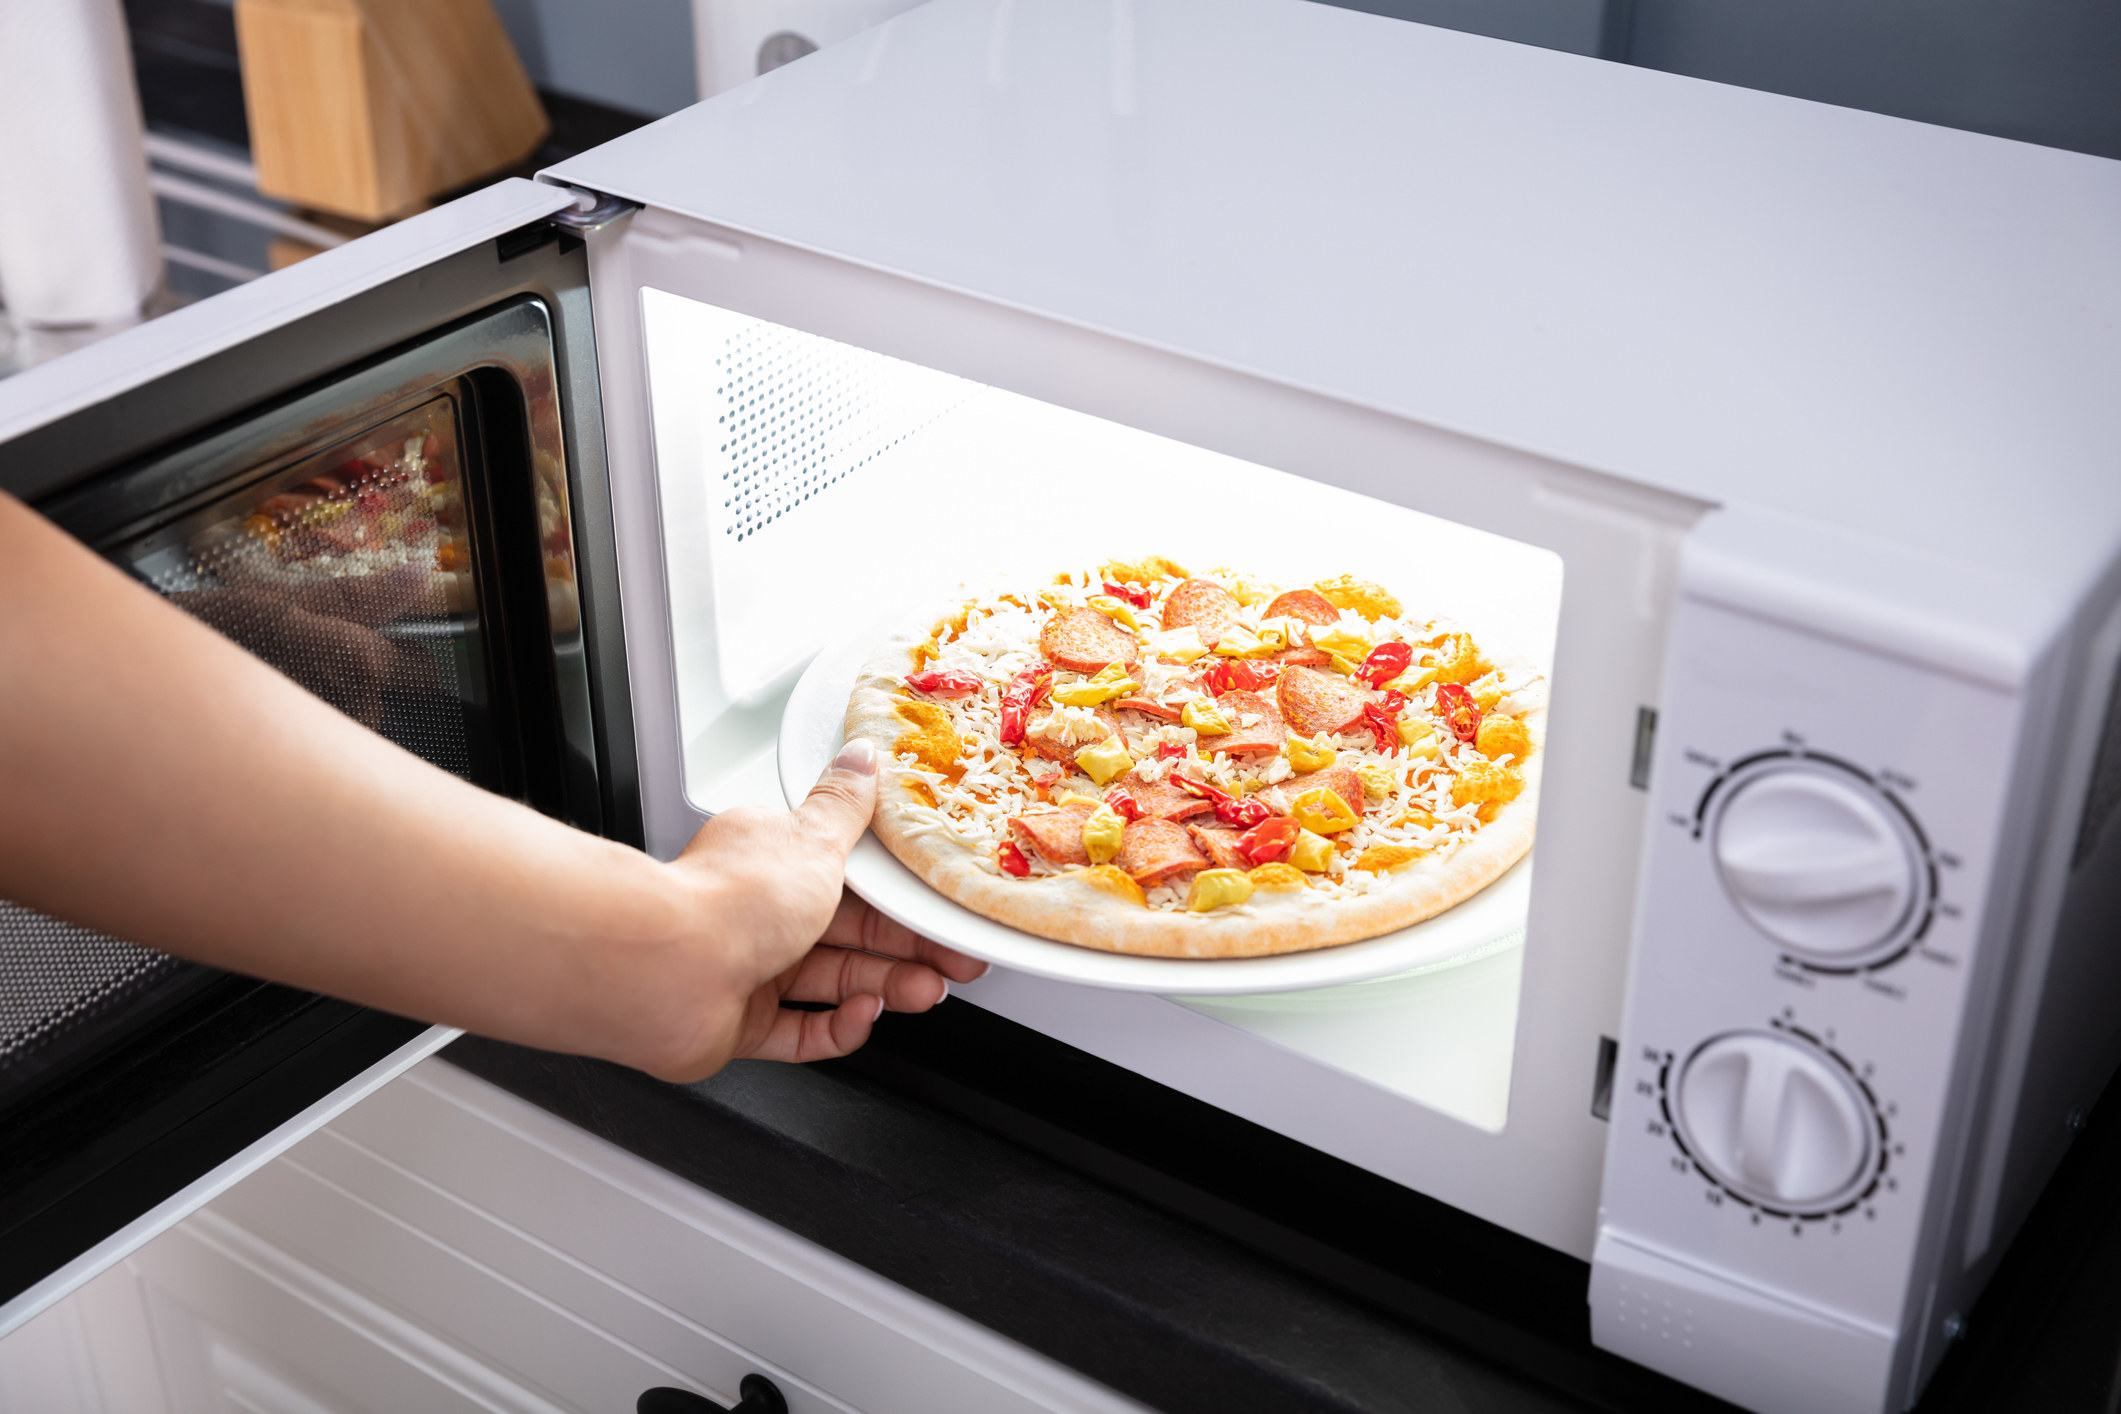 A person putting a pizza in the microwave.